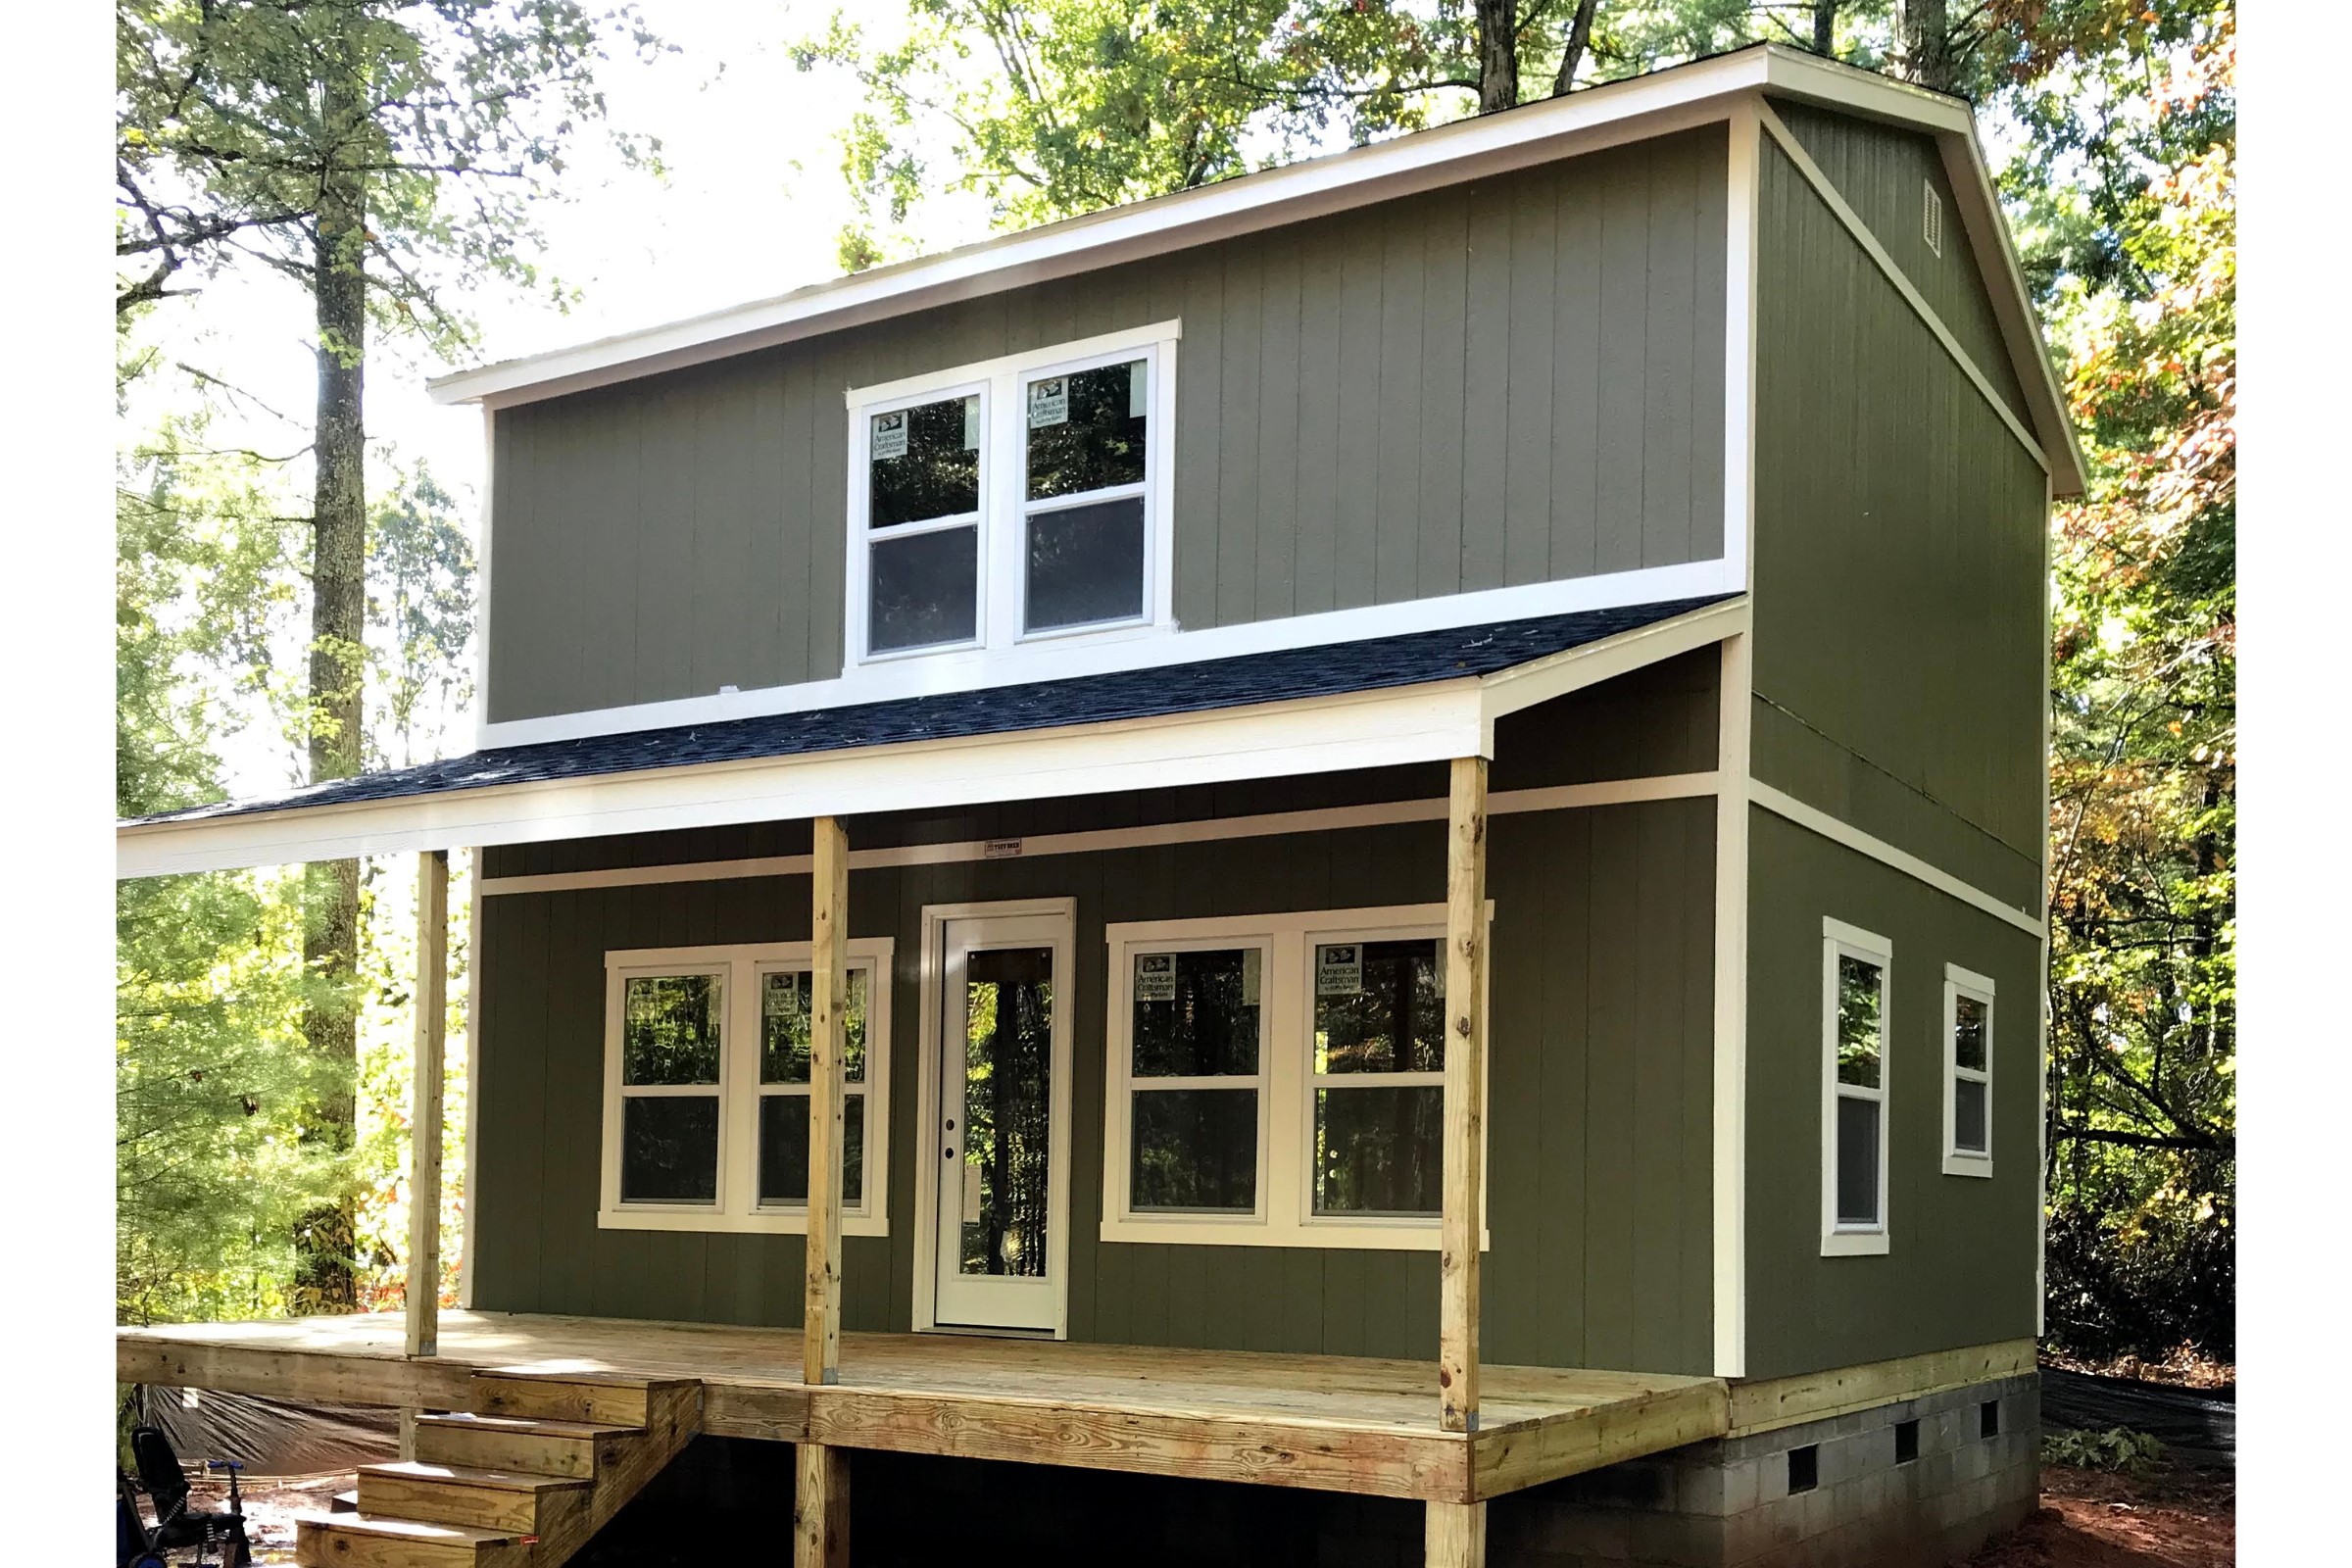 We Turned a Home Depot Shed Into a Tiny House and Sold it for $275,000